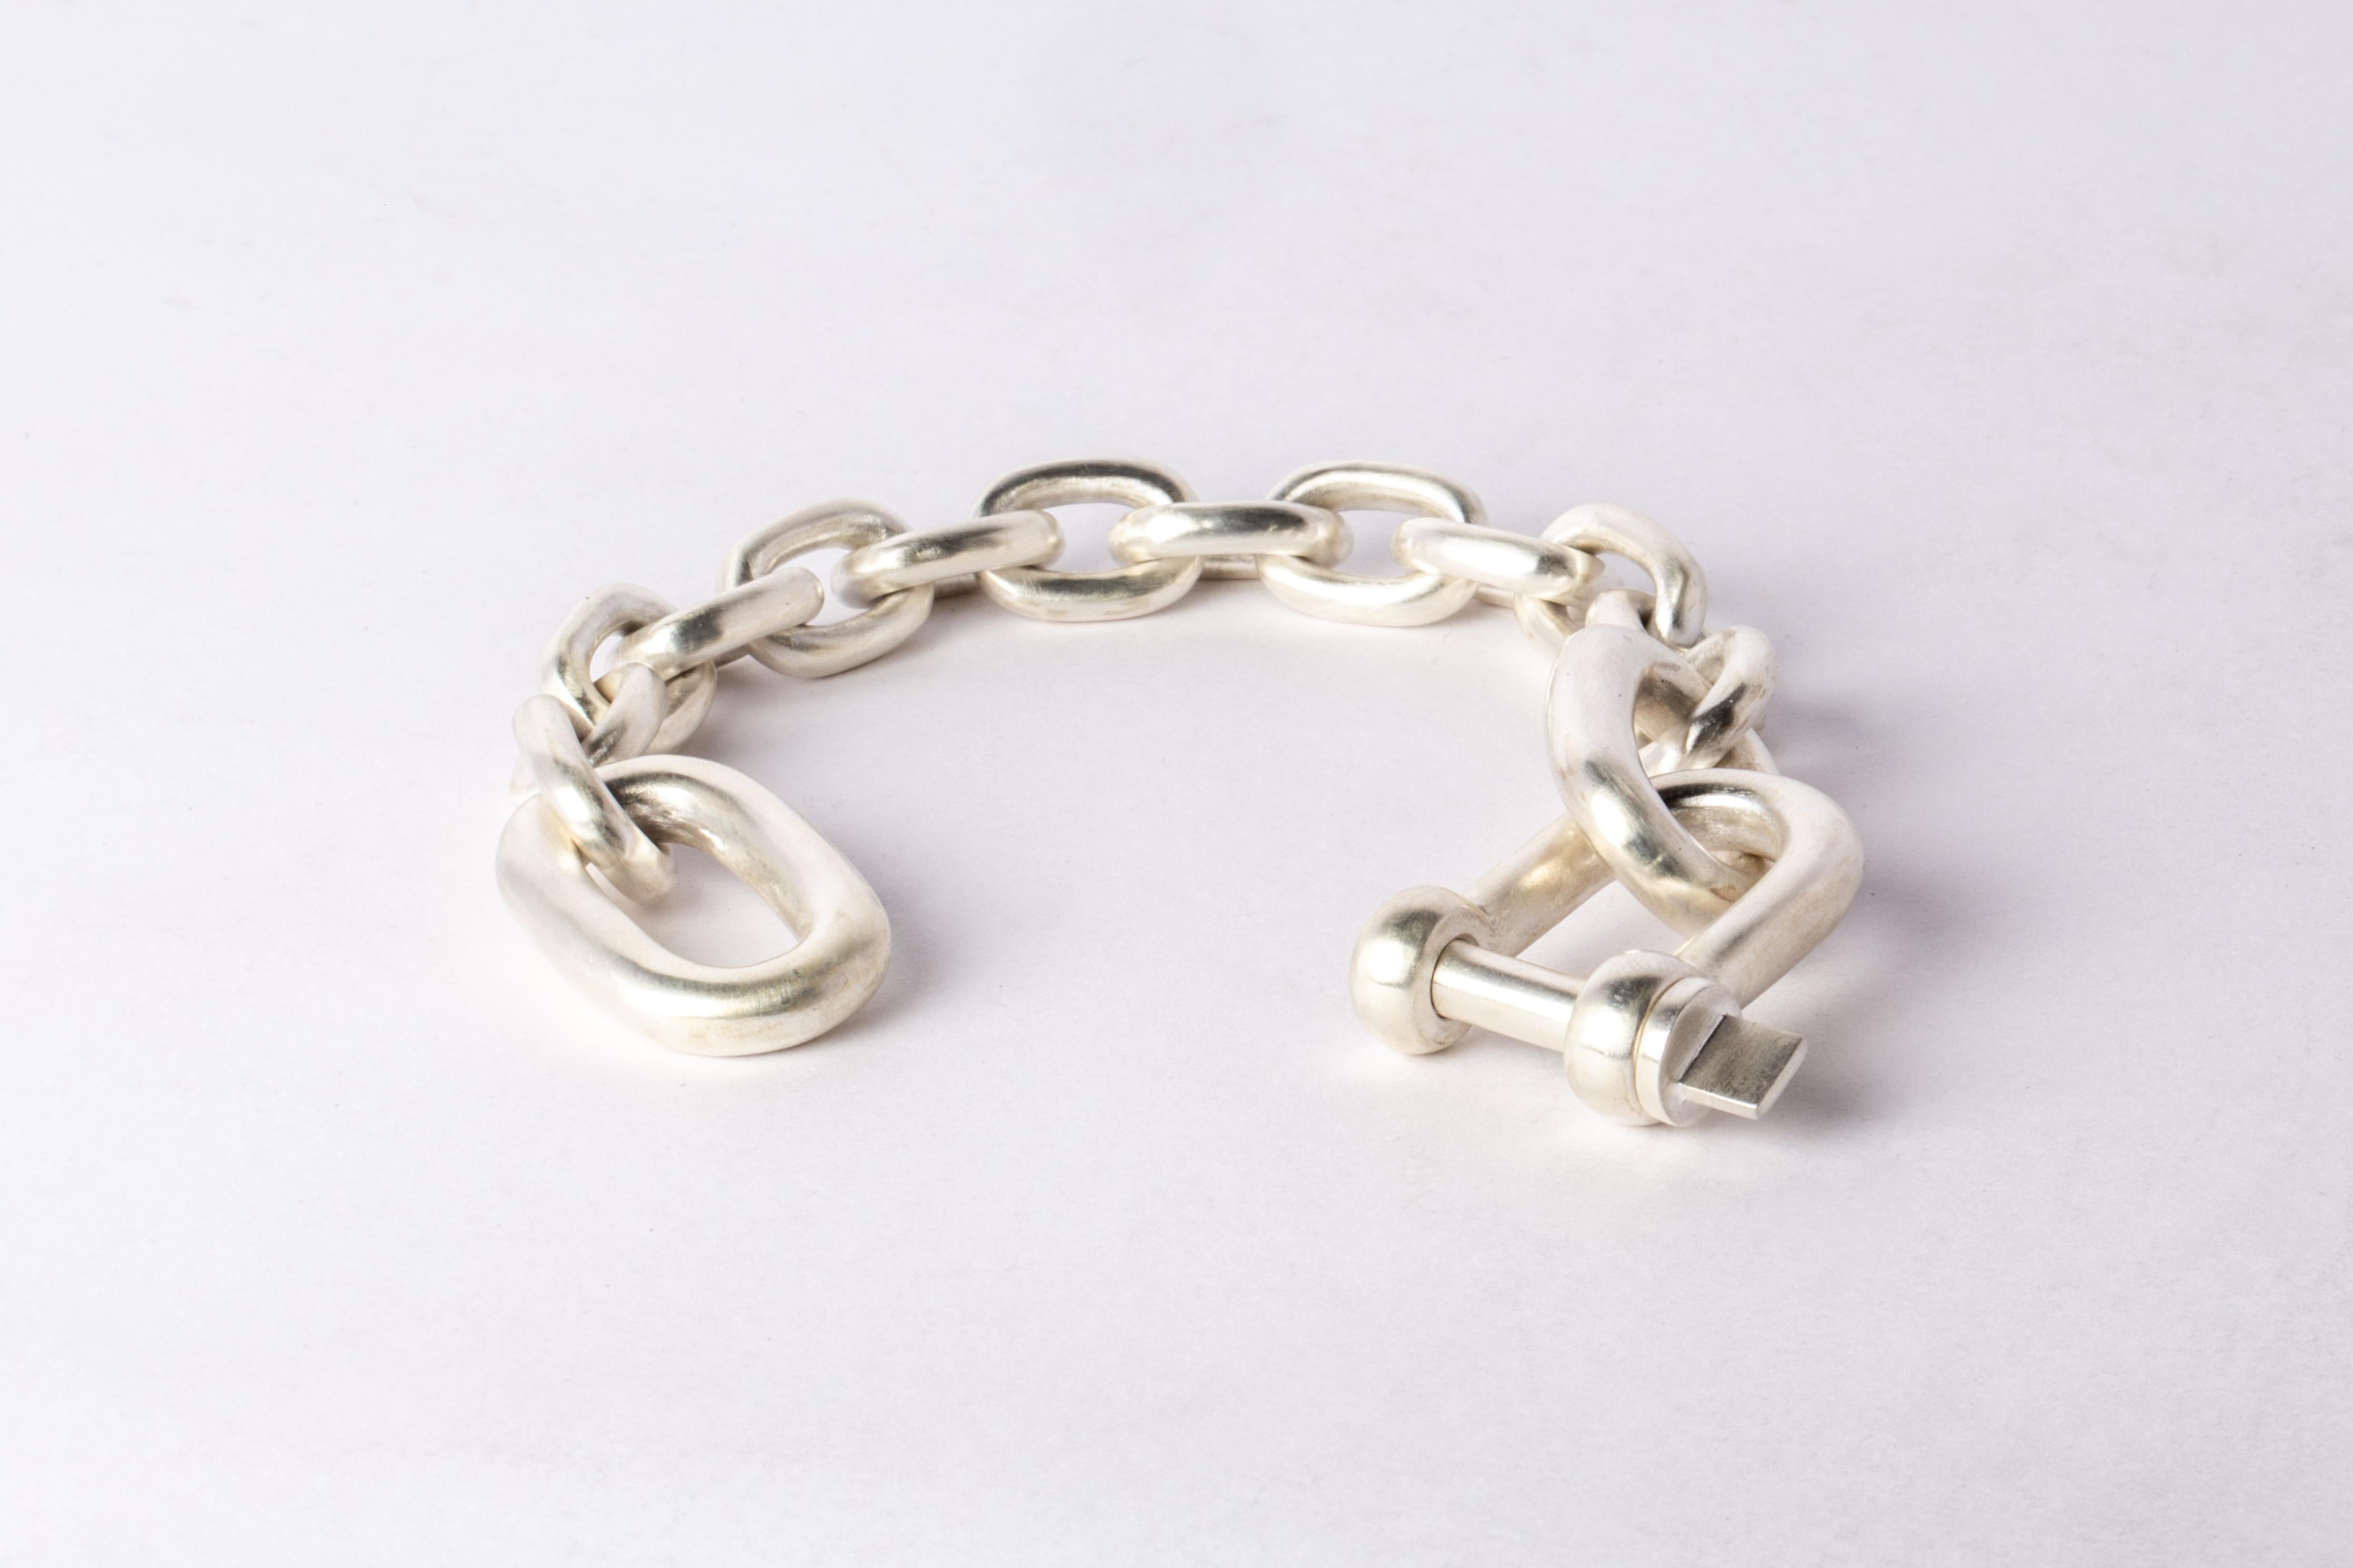 Grade Chain Charm Bracelet (MA) In New Condition For Sale In Hong Kong, Hong Kong Island